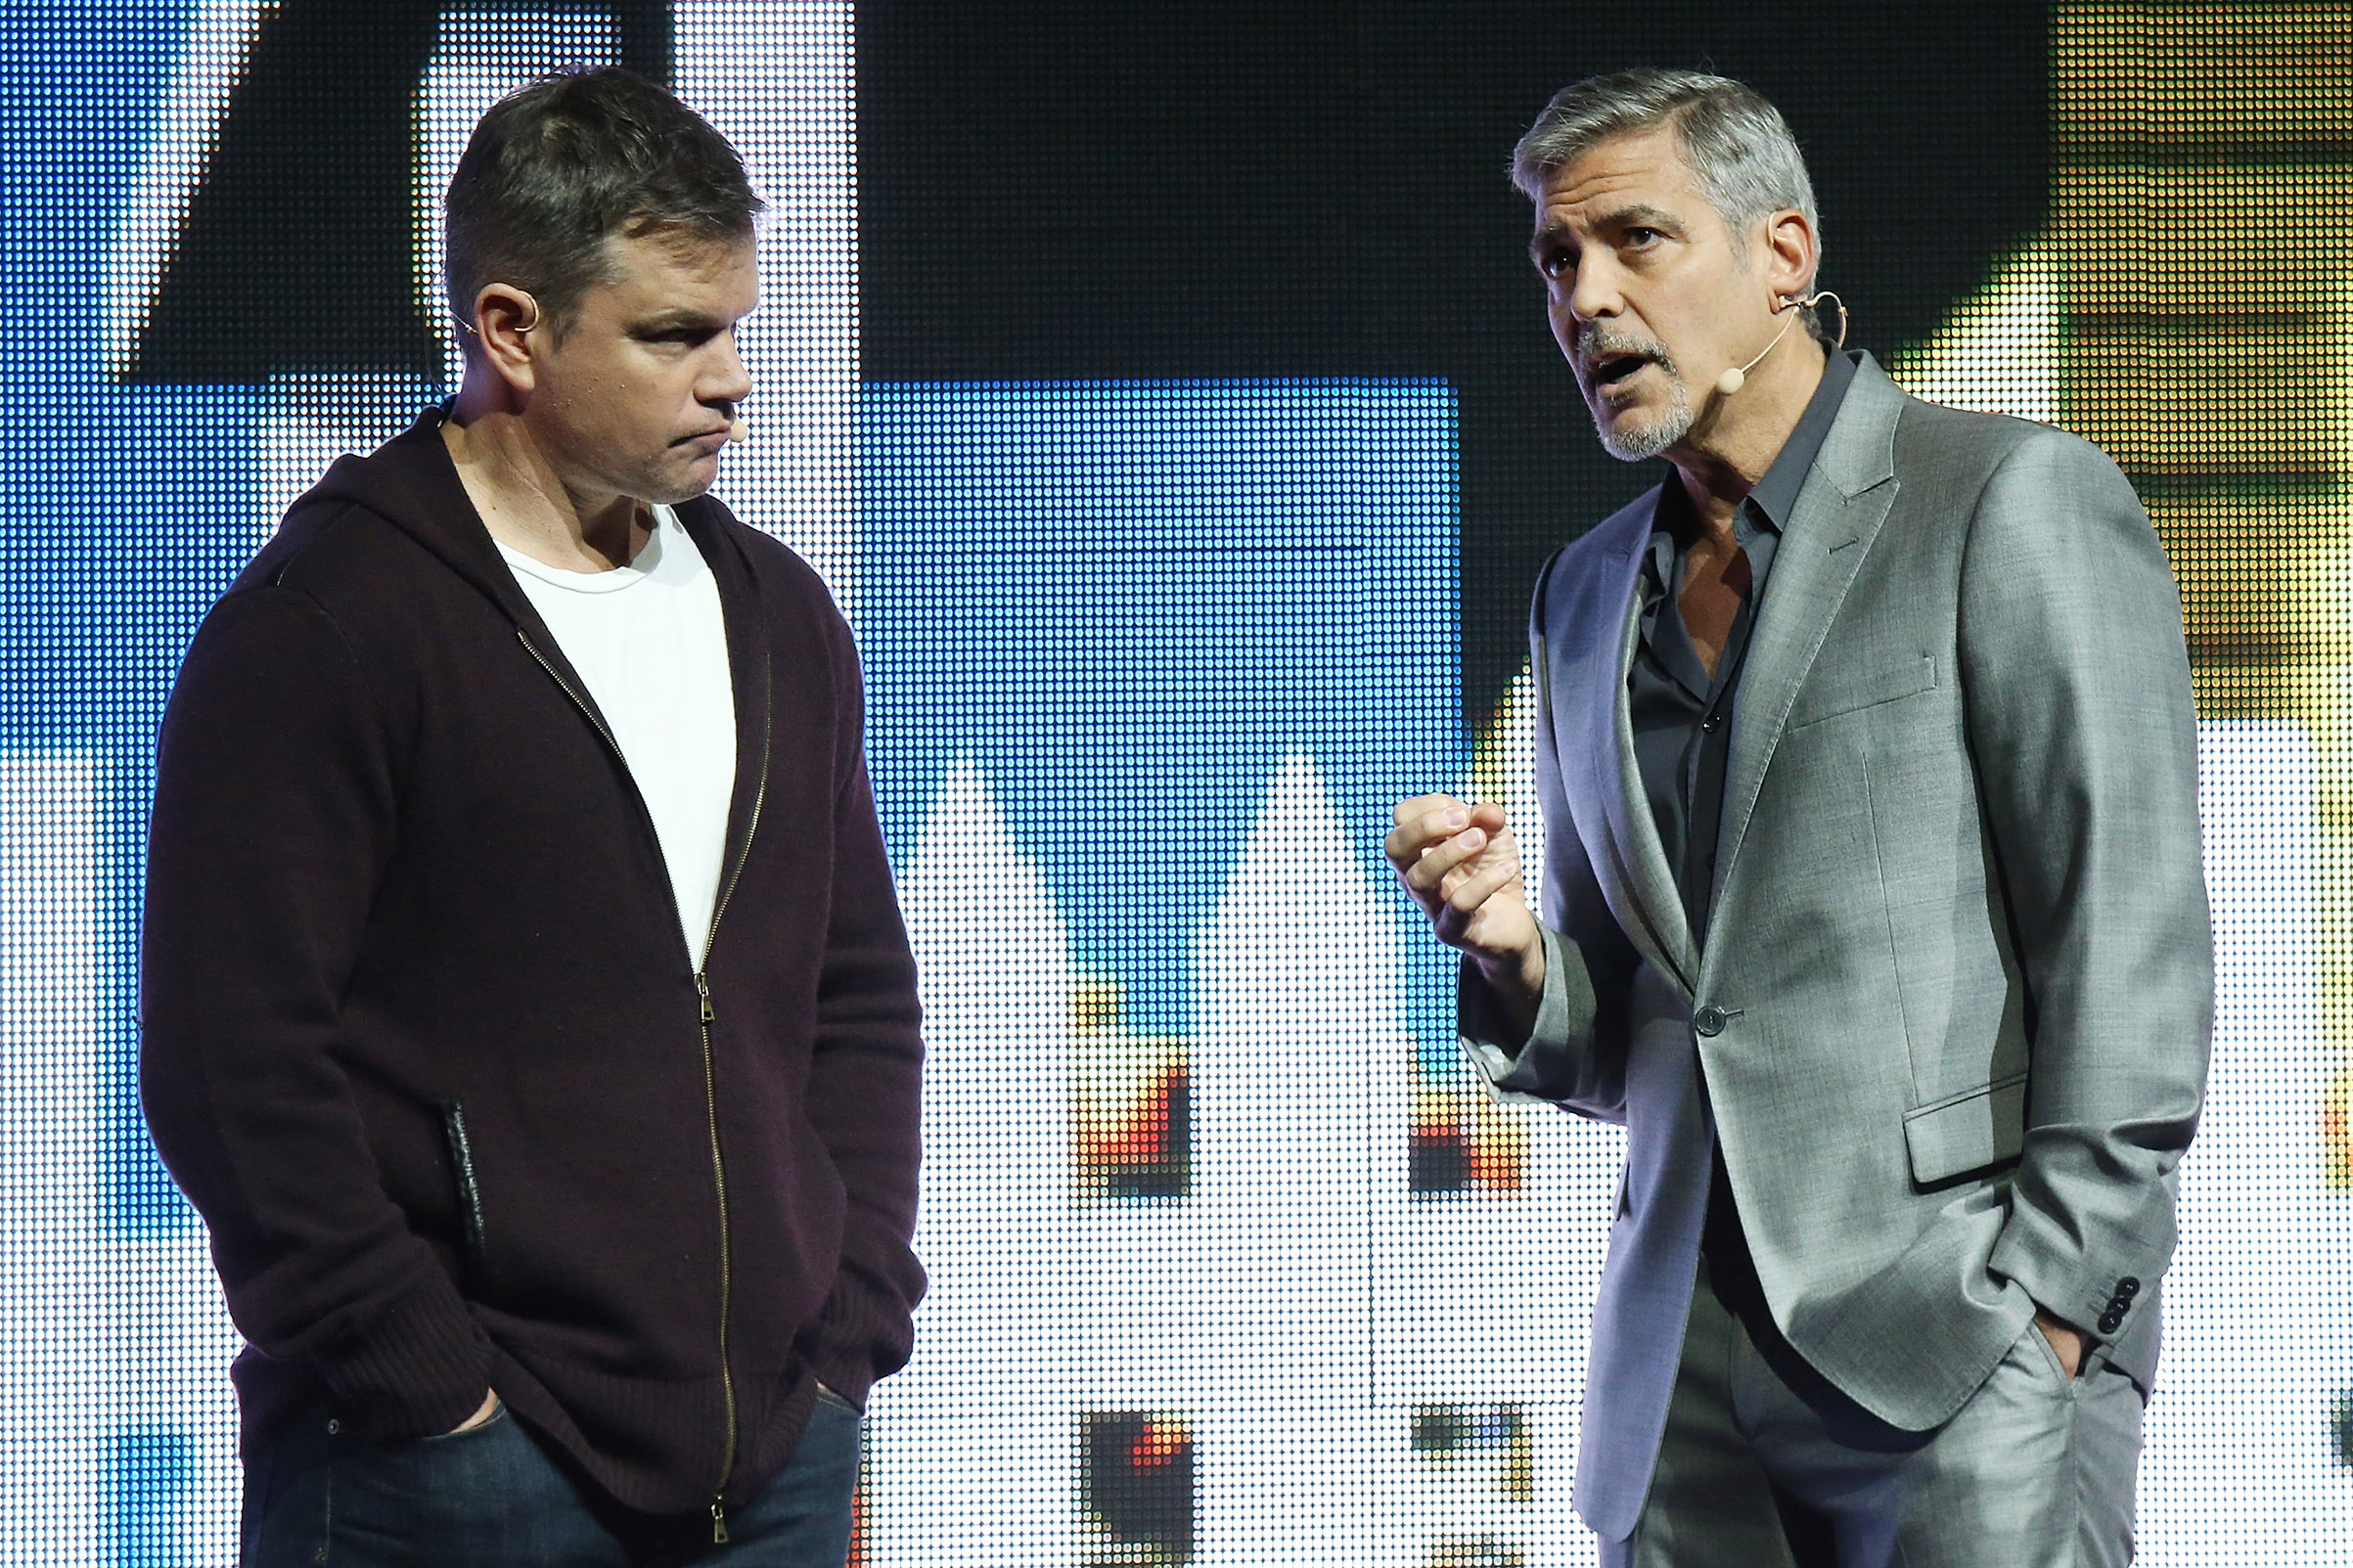 Matt Damon and George Clooney speak onstage at the Paramount Pictures' presentation, on March 28, 2017 in Las Vegas. (Michael Tran—FilmMagic/Getty Images)